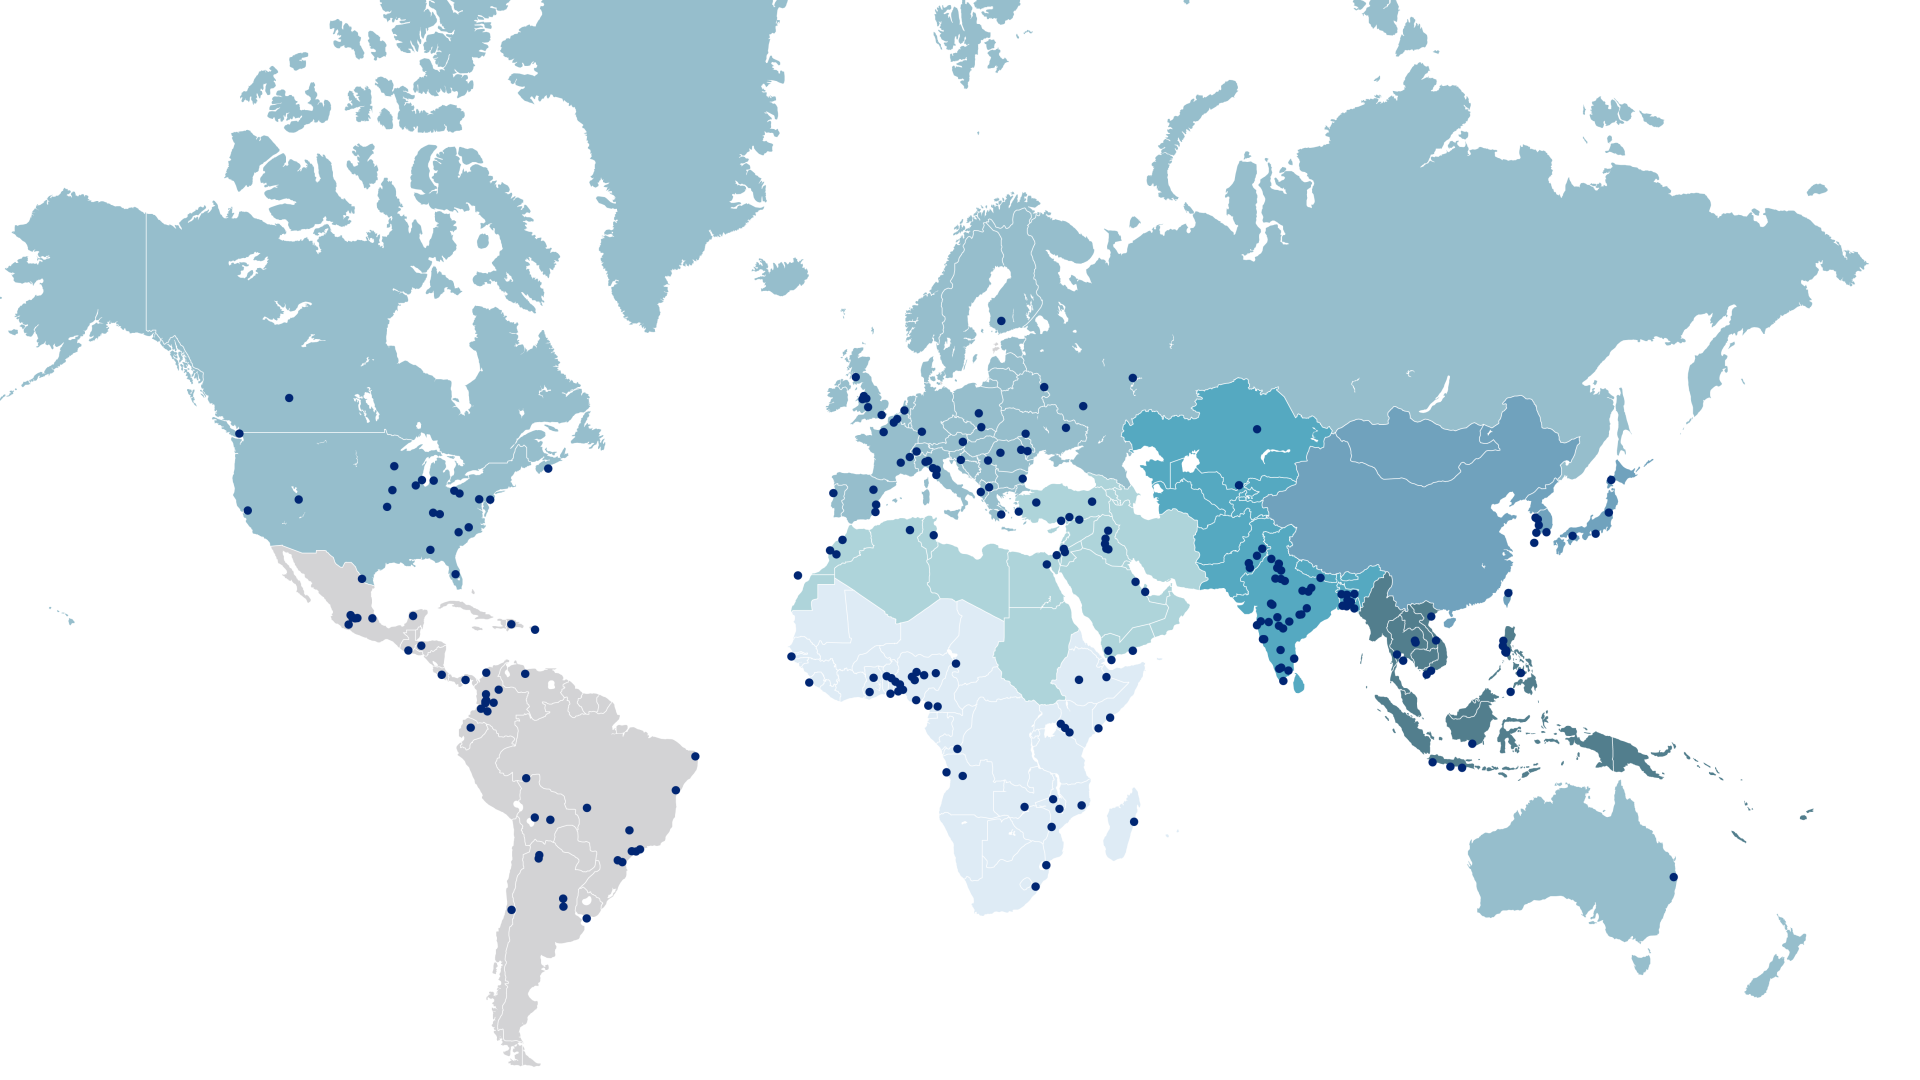 World map colored in various shades of blue with dark blue dots